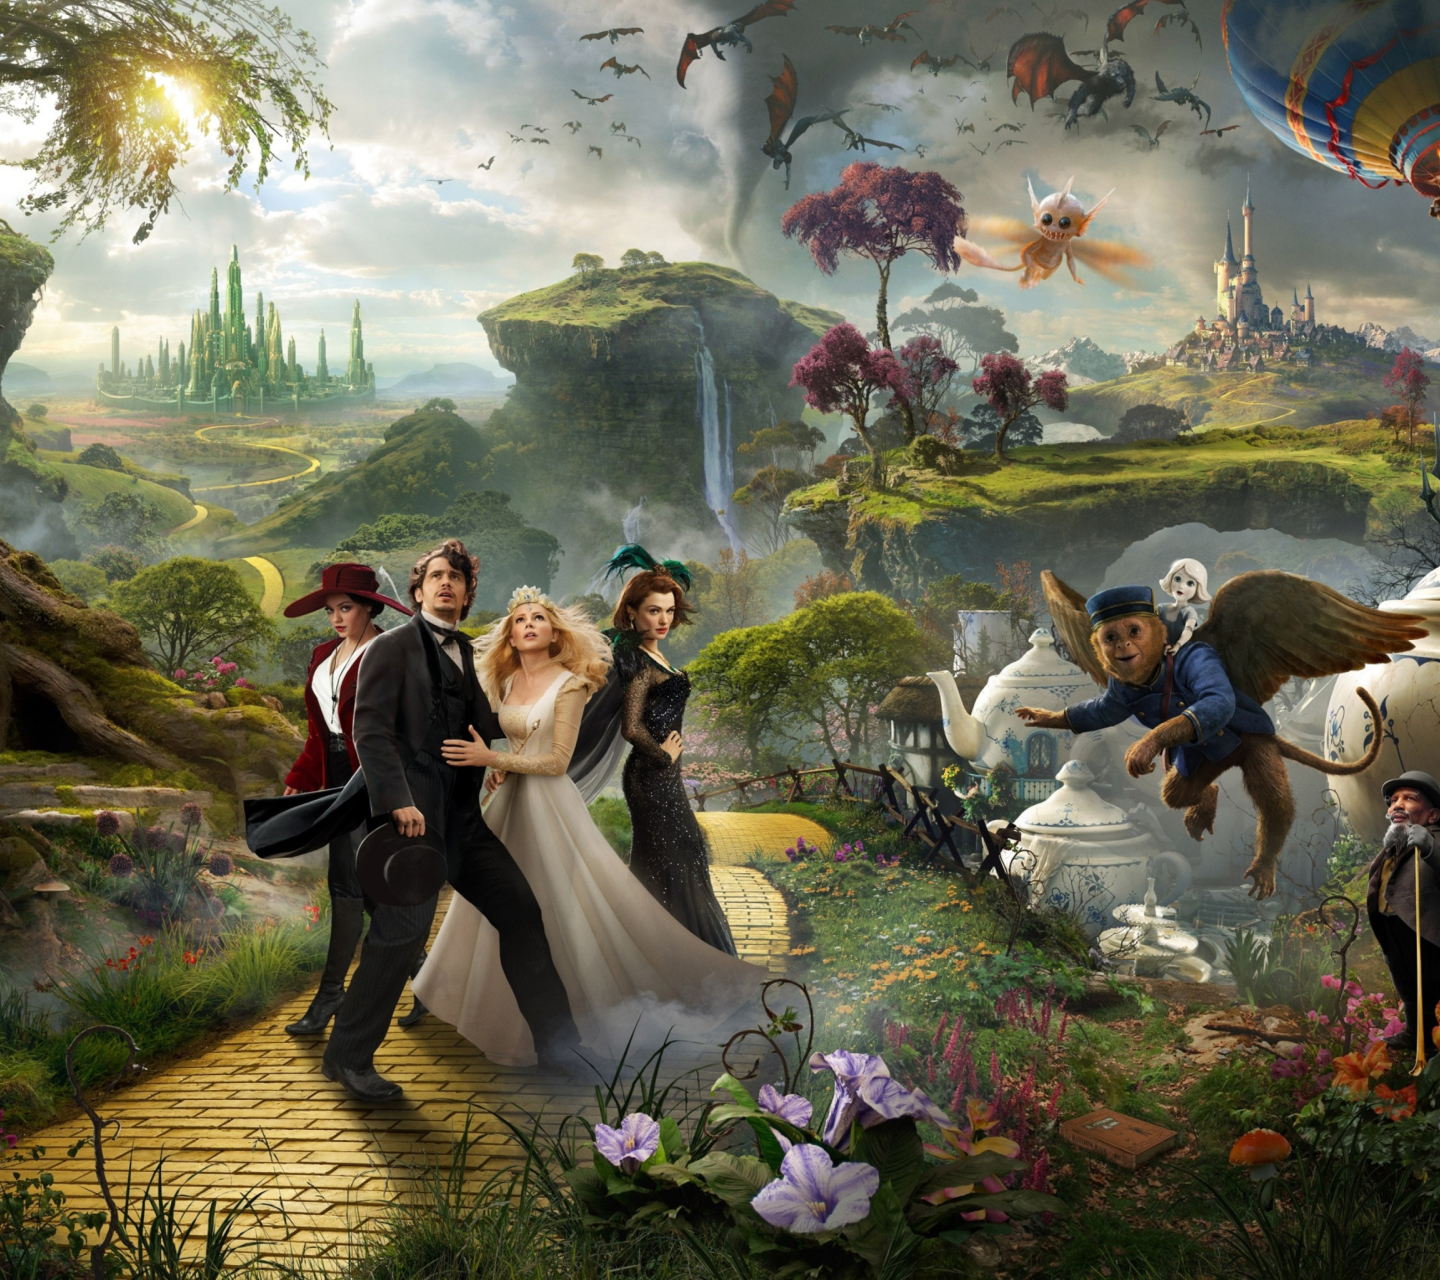 Oz The Great And Powerful 2013 Movie screenshot #1 1440x1280